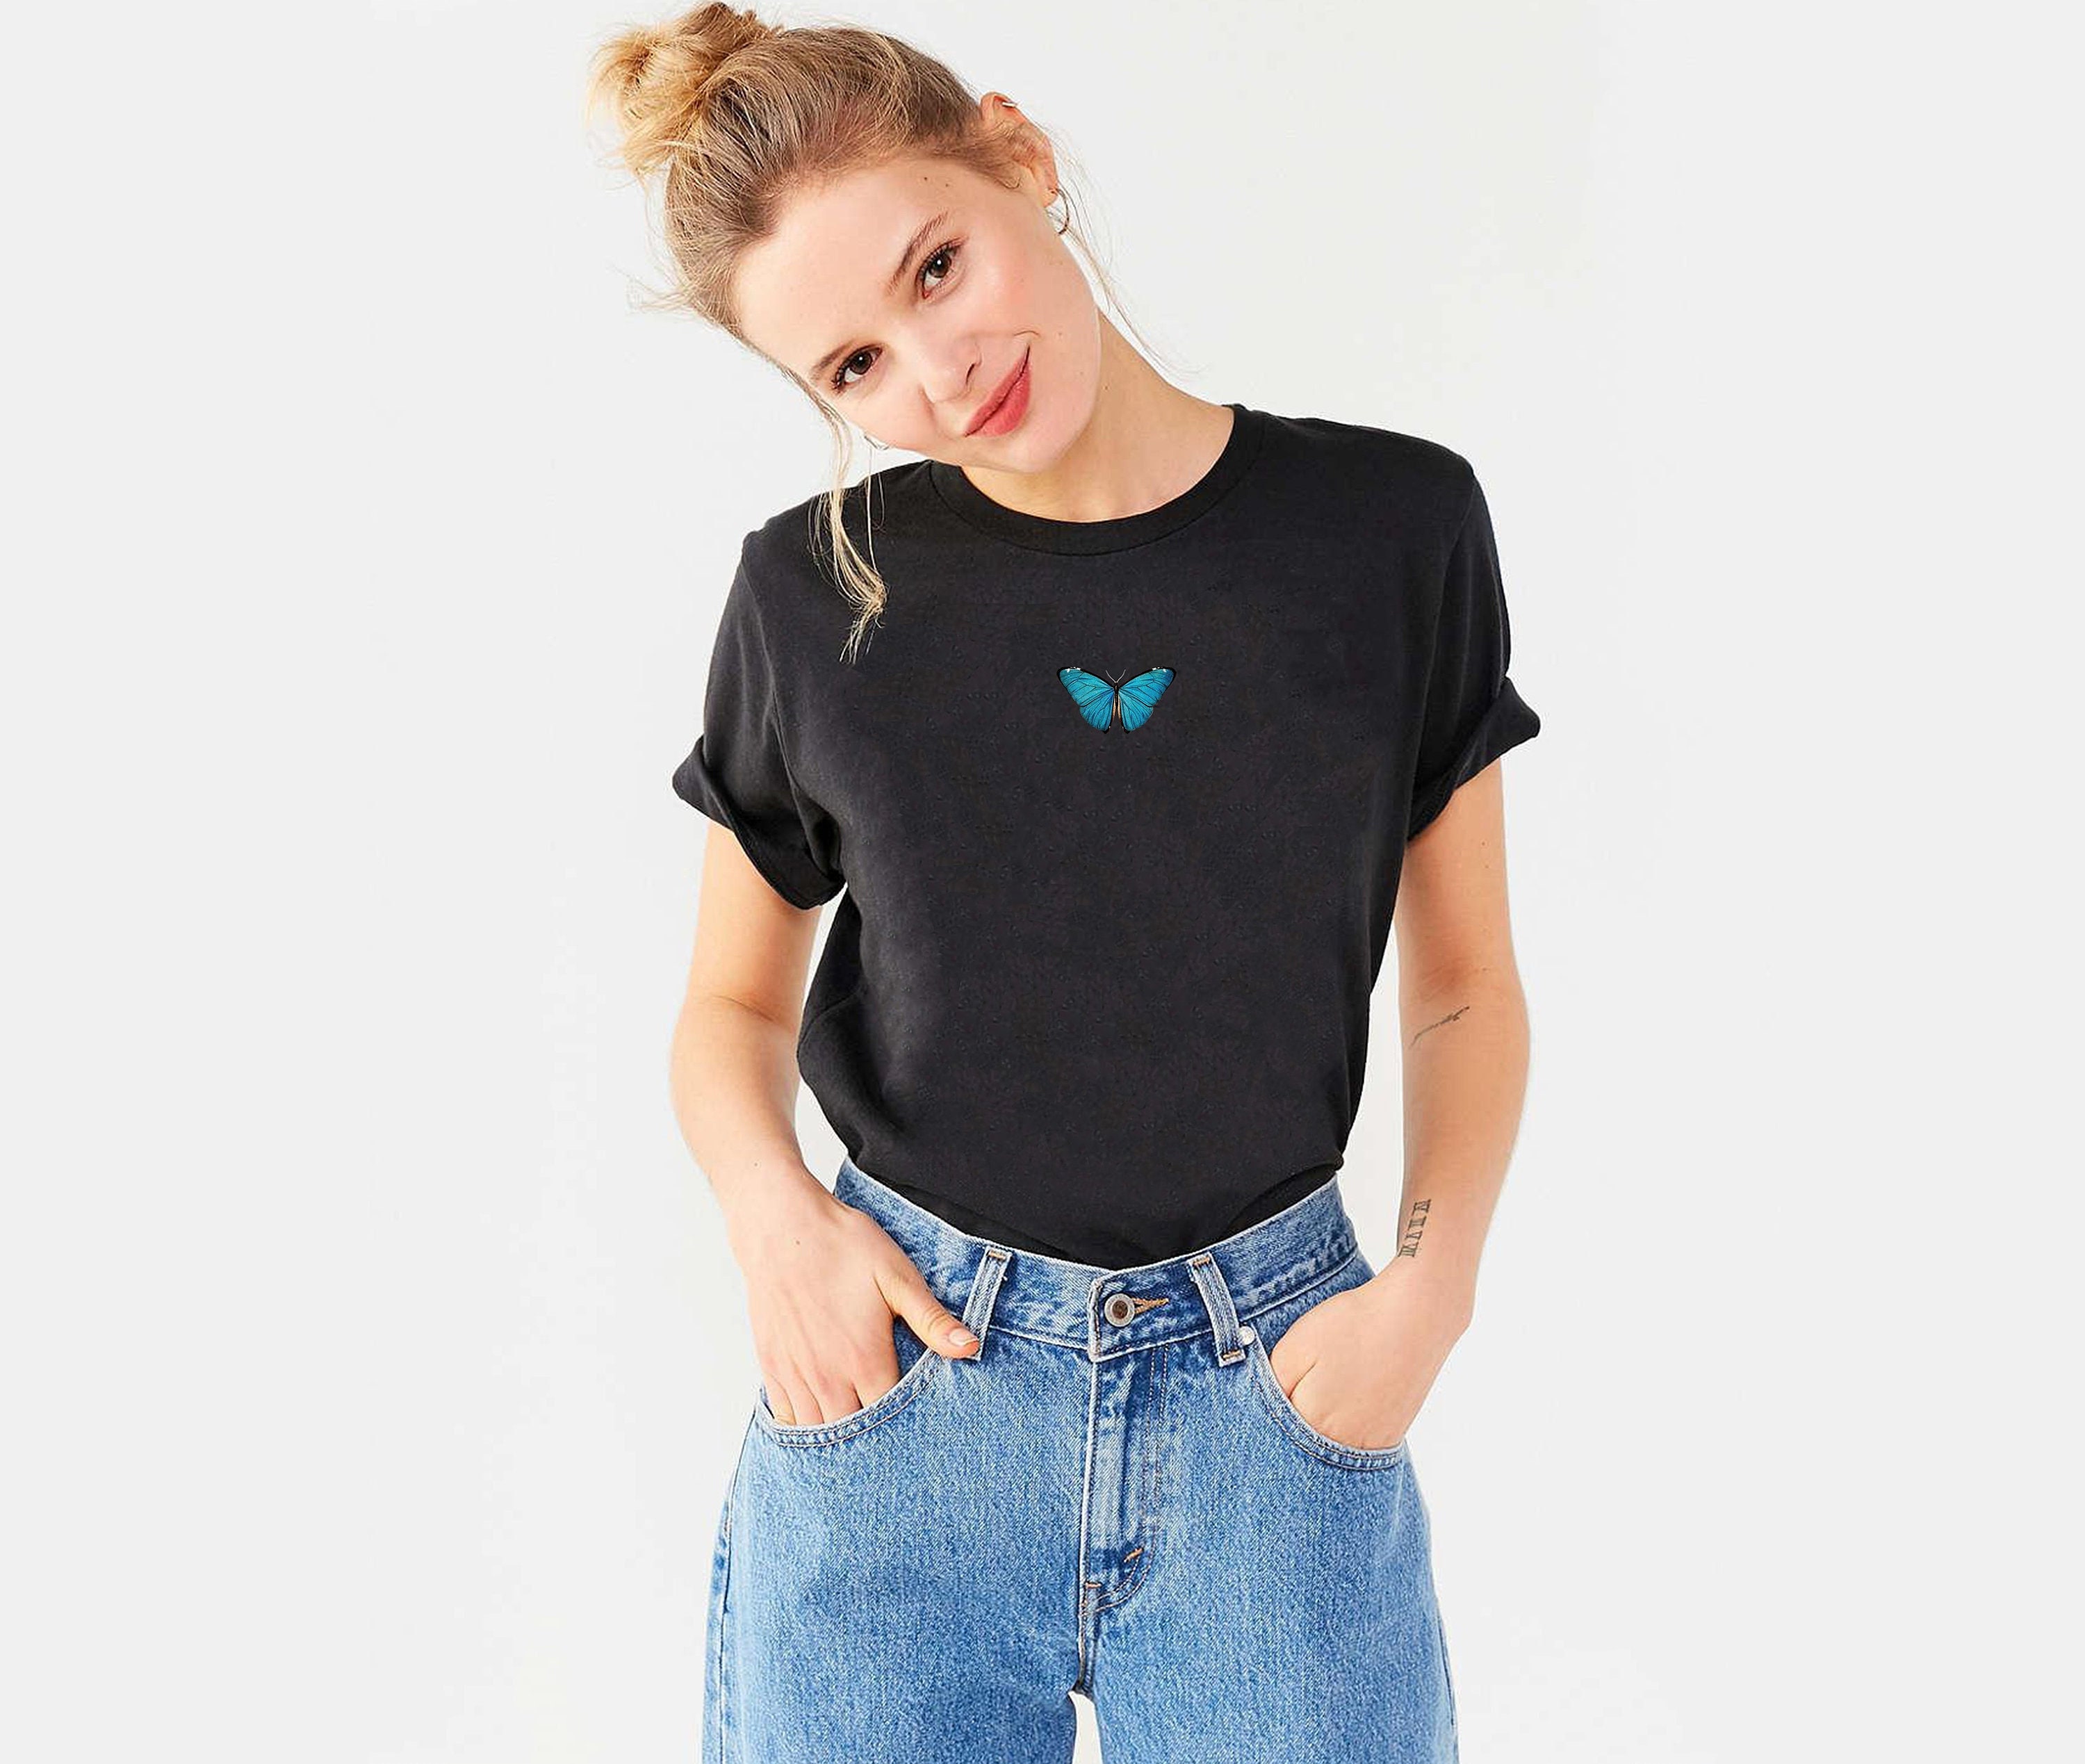 Blue Butterfly Shirt - Etsy | T-Shirts